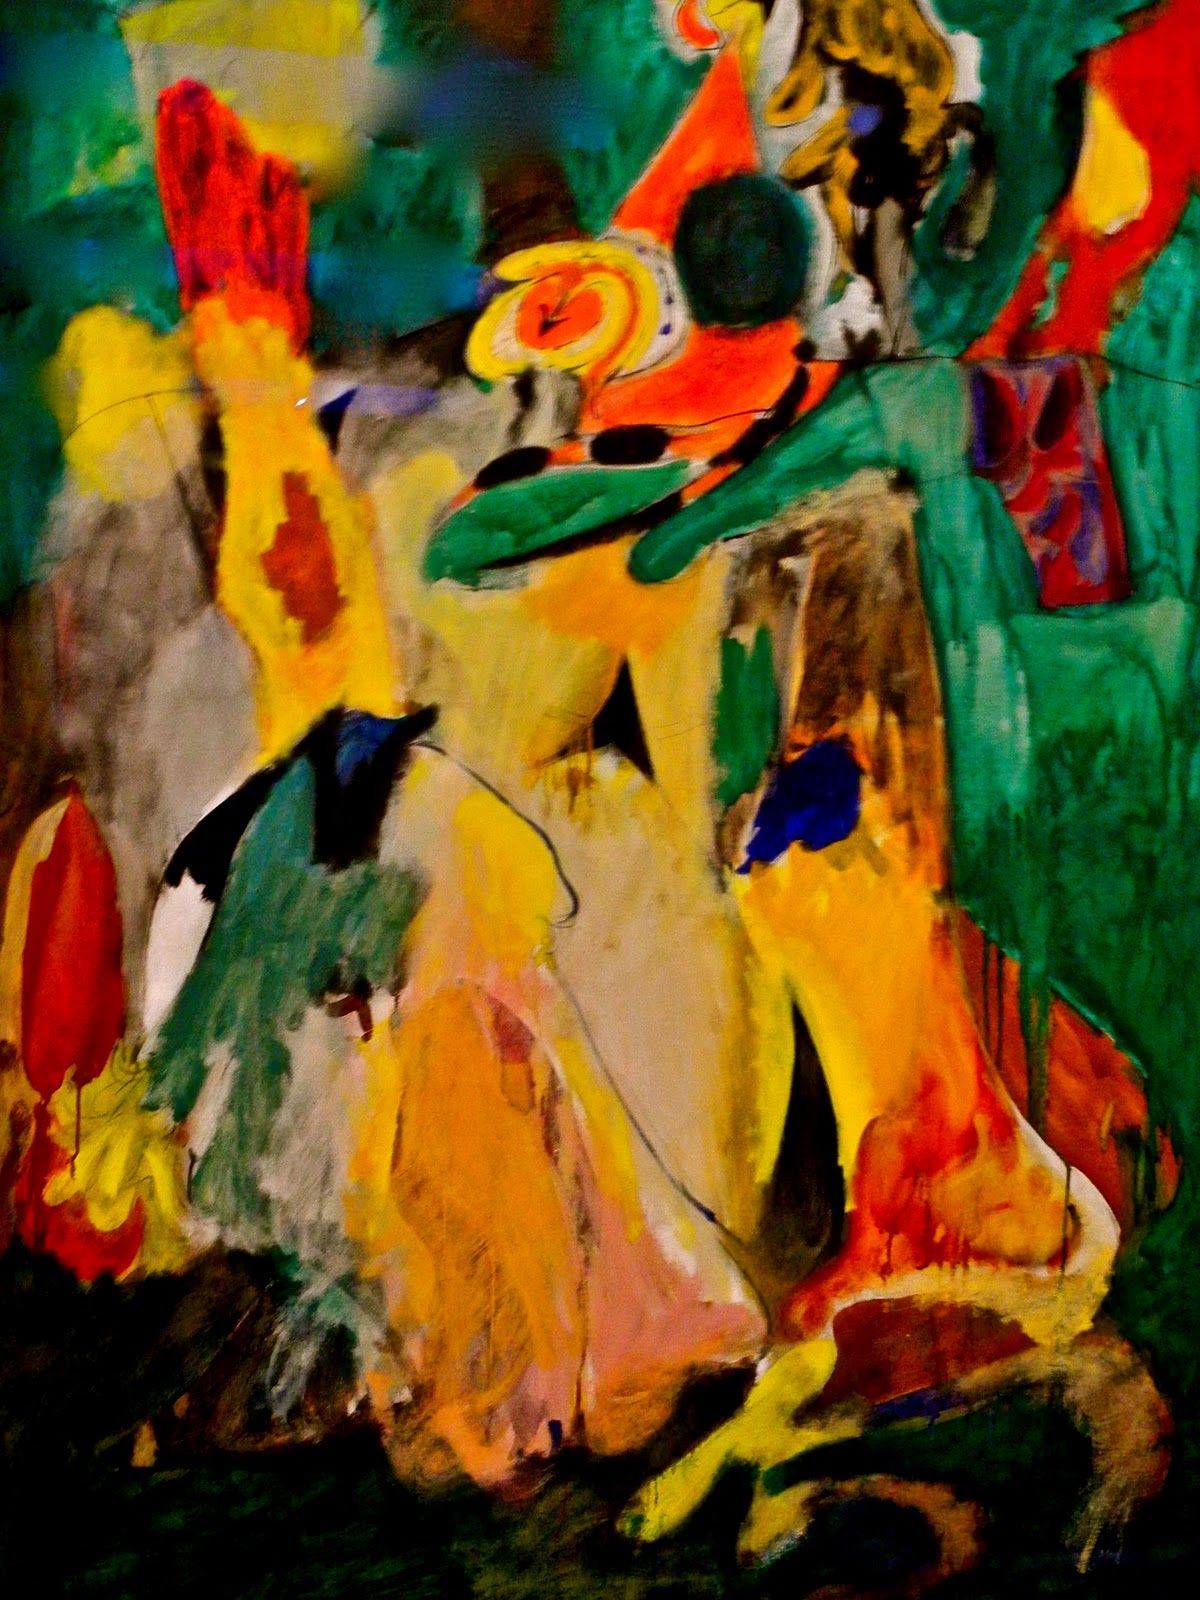 Best Arshile Gorky image. Abstract expressionism, Abstract expressionist, Abstract